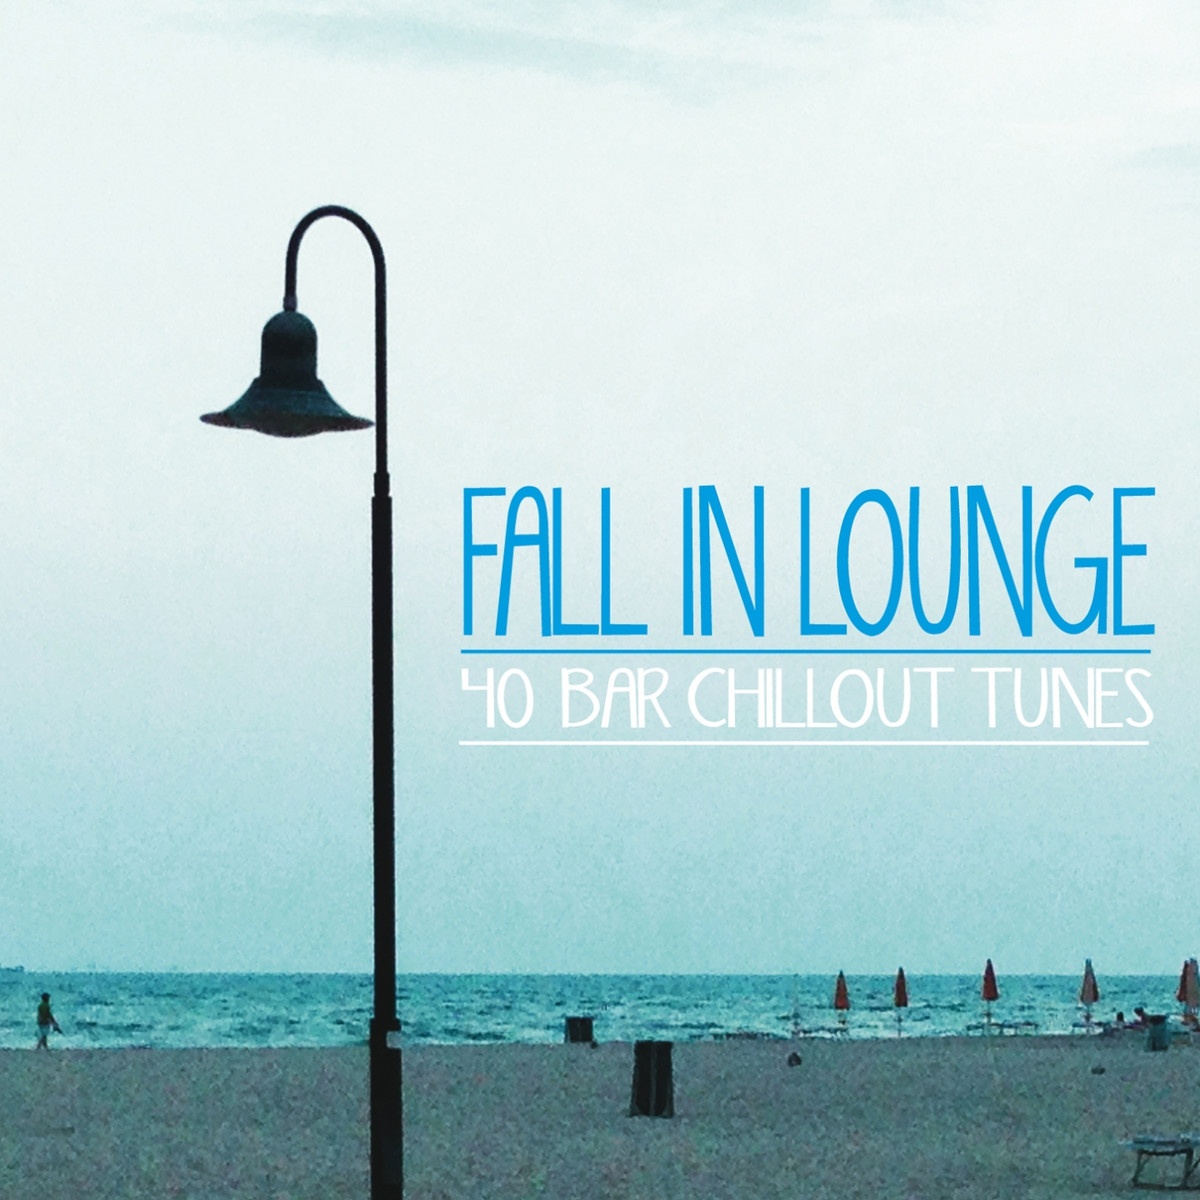 Fall in Lounge (40 Bar Chillout Tunes)